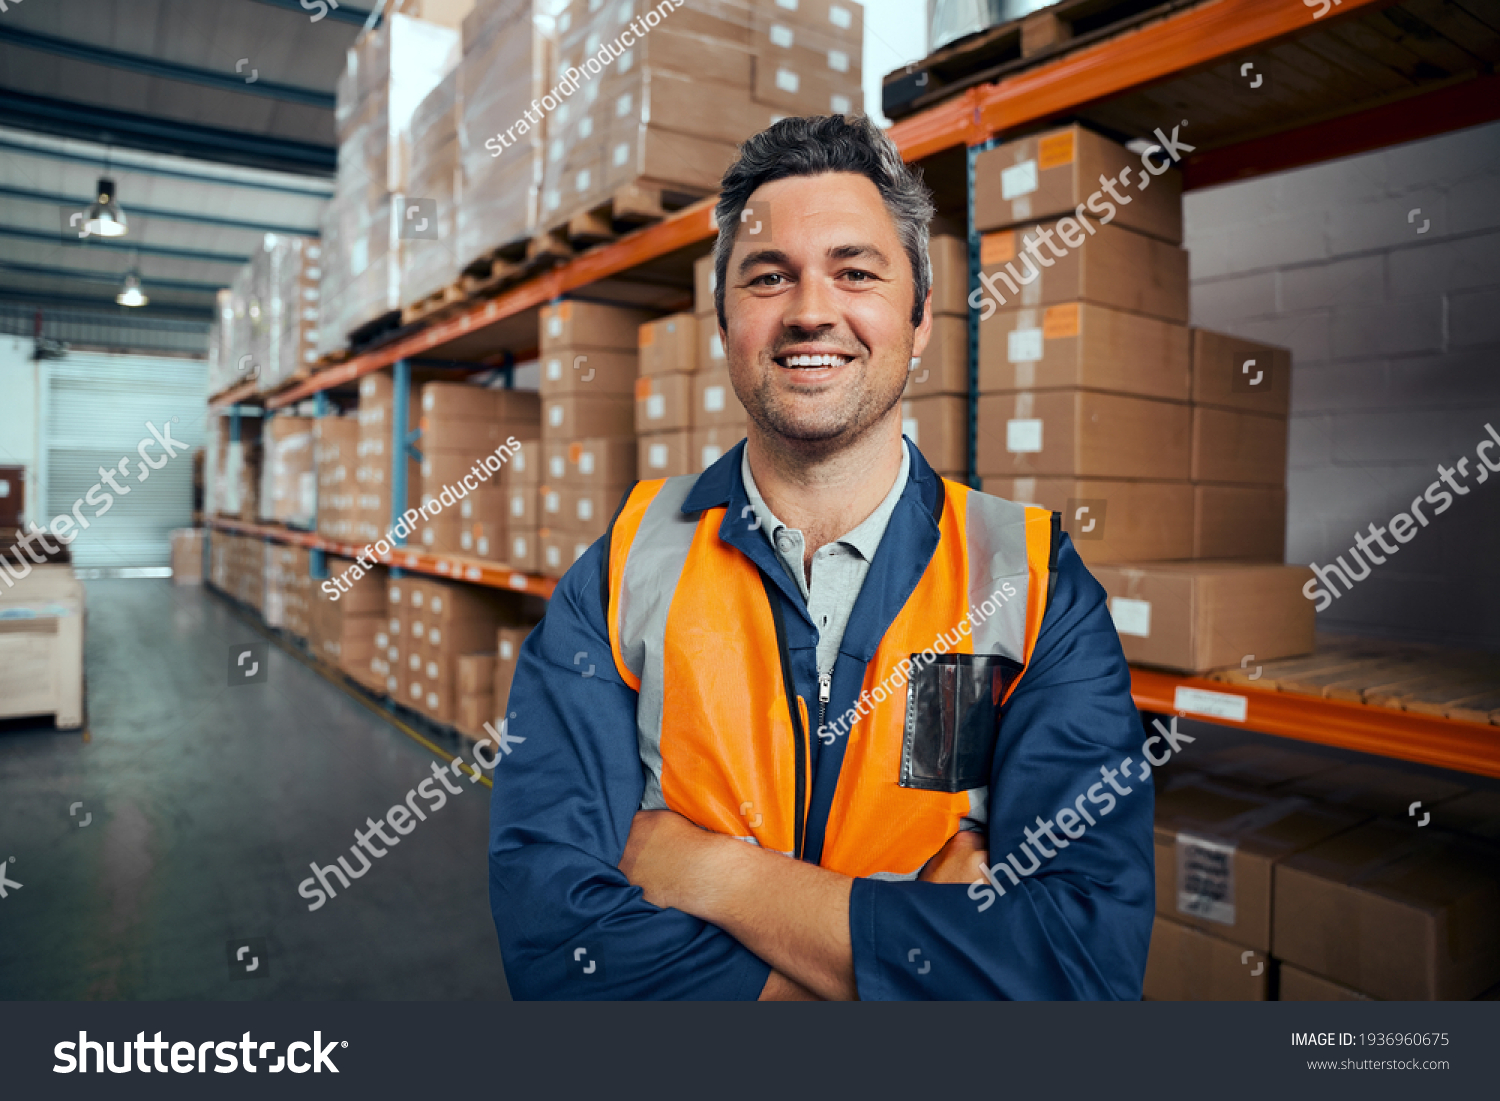 Smiling portrait of a male supervisor standing in warehouse with his arm crossed looking at camera #1936960675